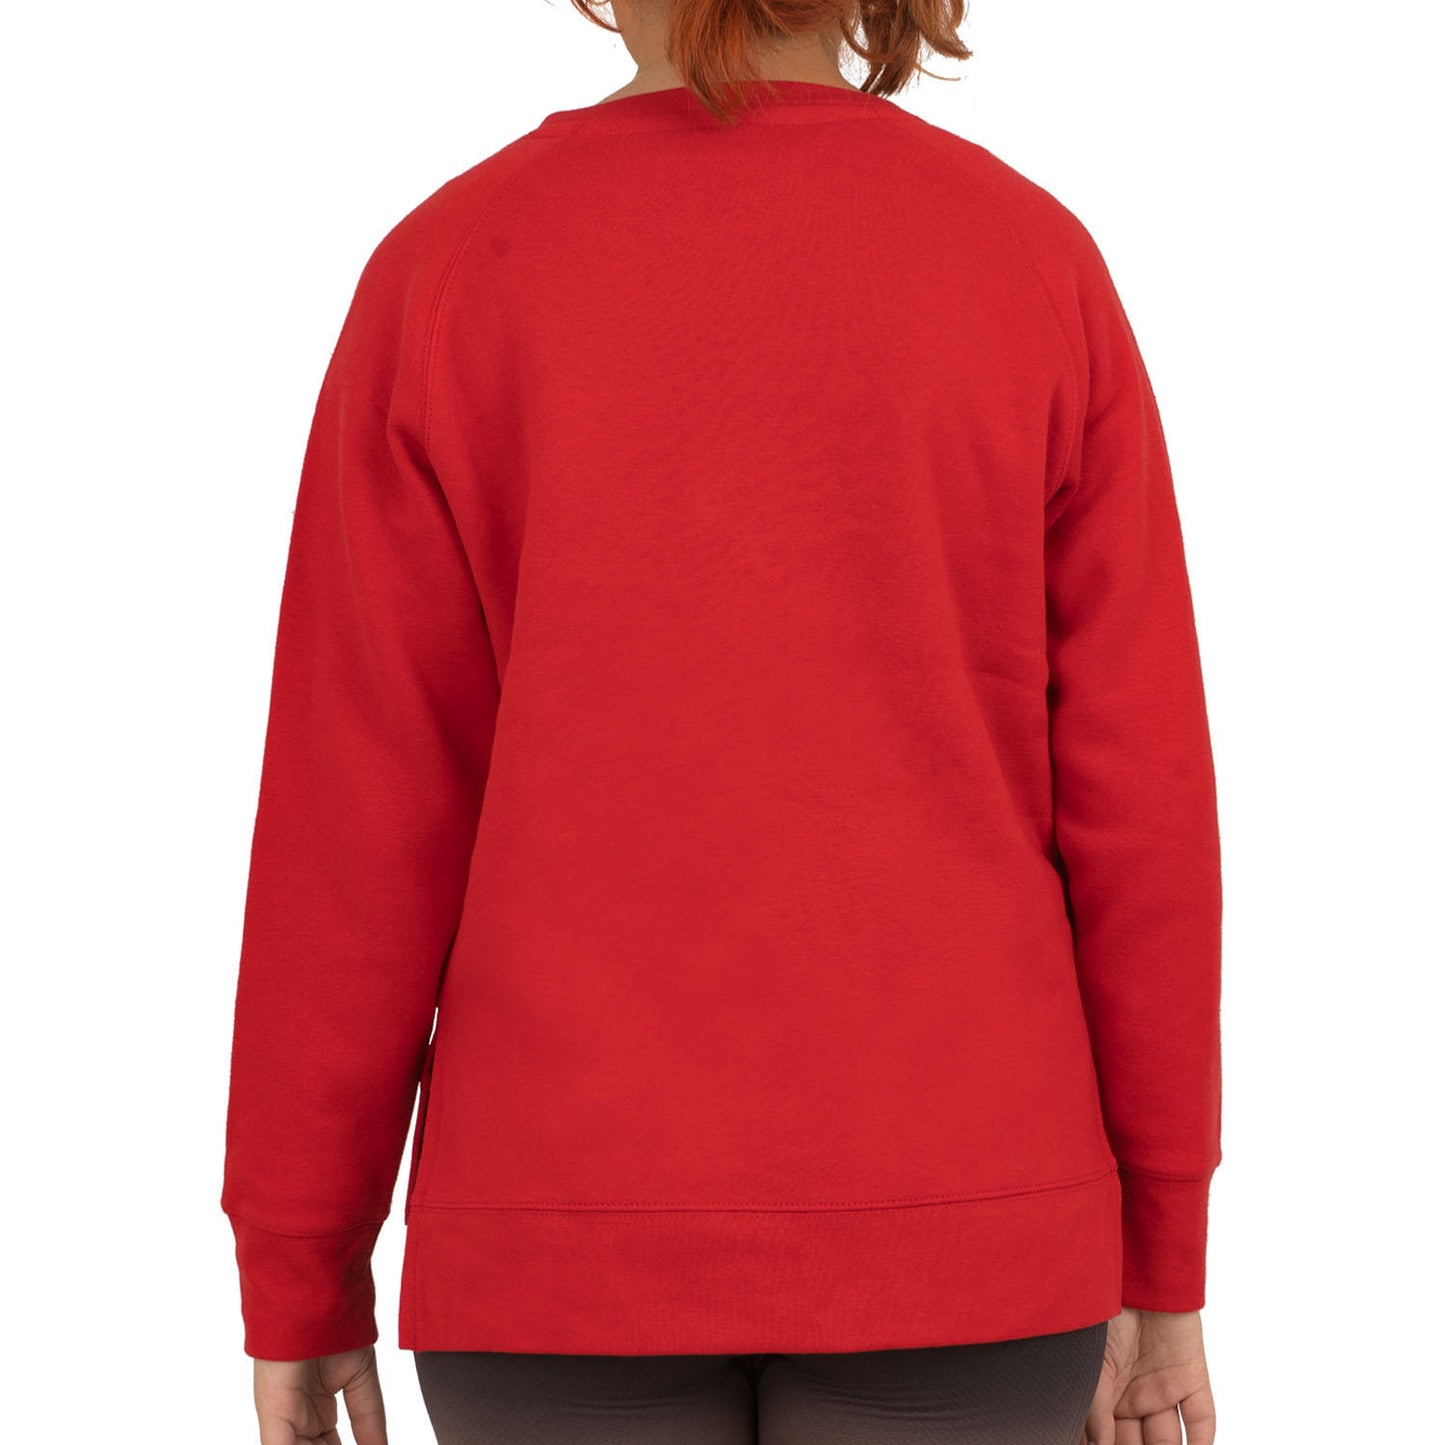 Royce Ladies Holiday Top. Red. Merry Christmas.